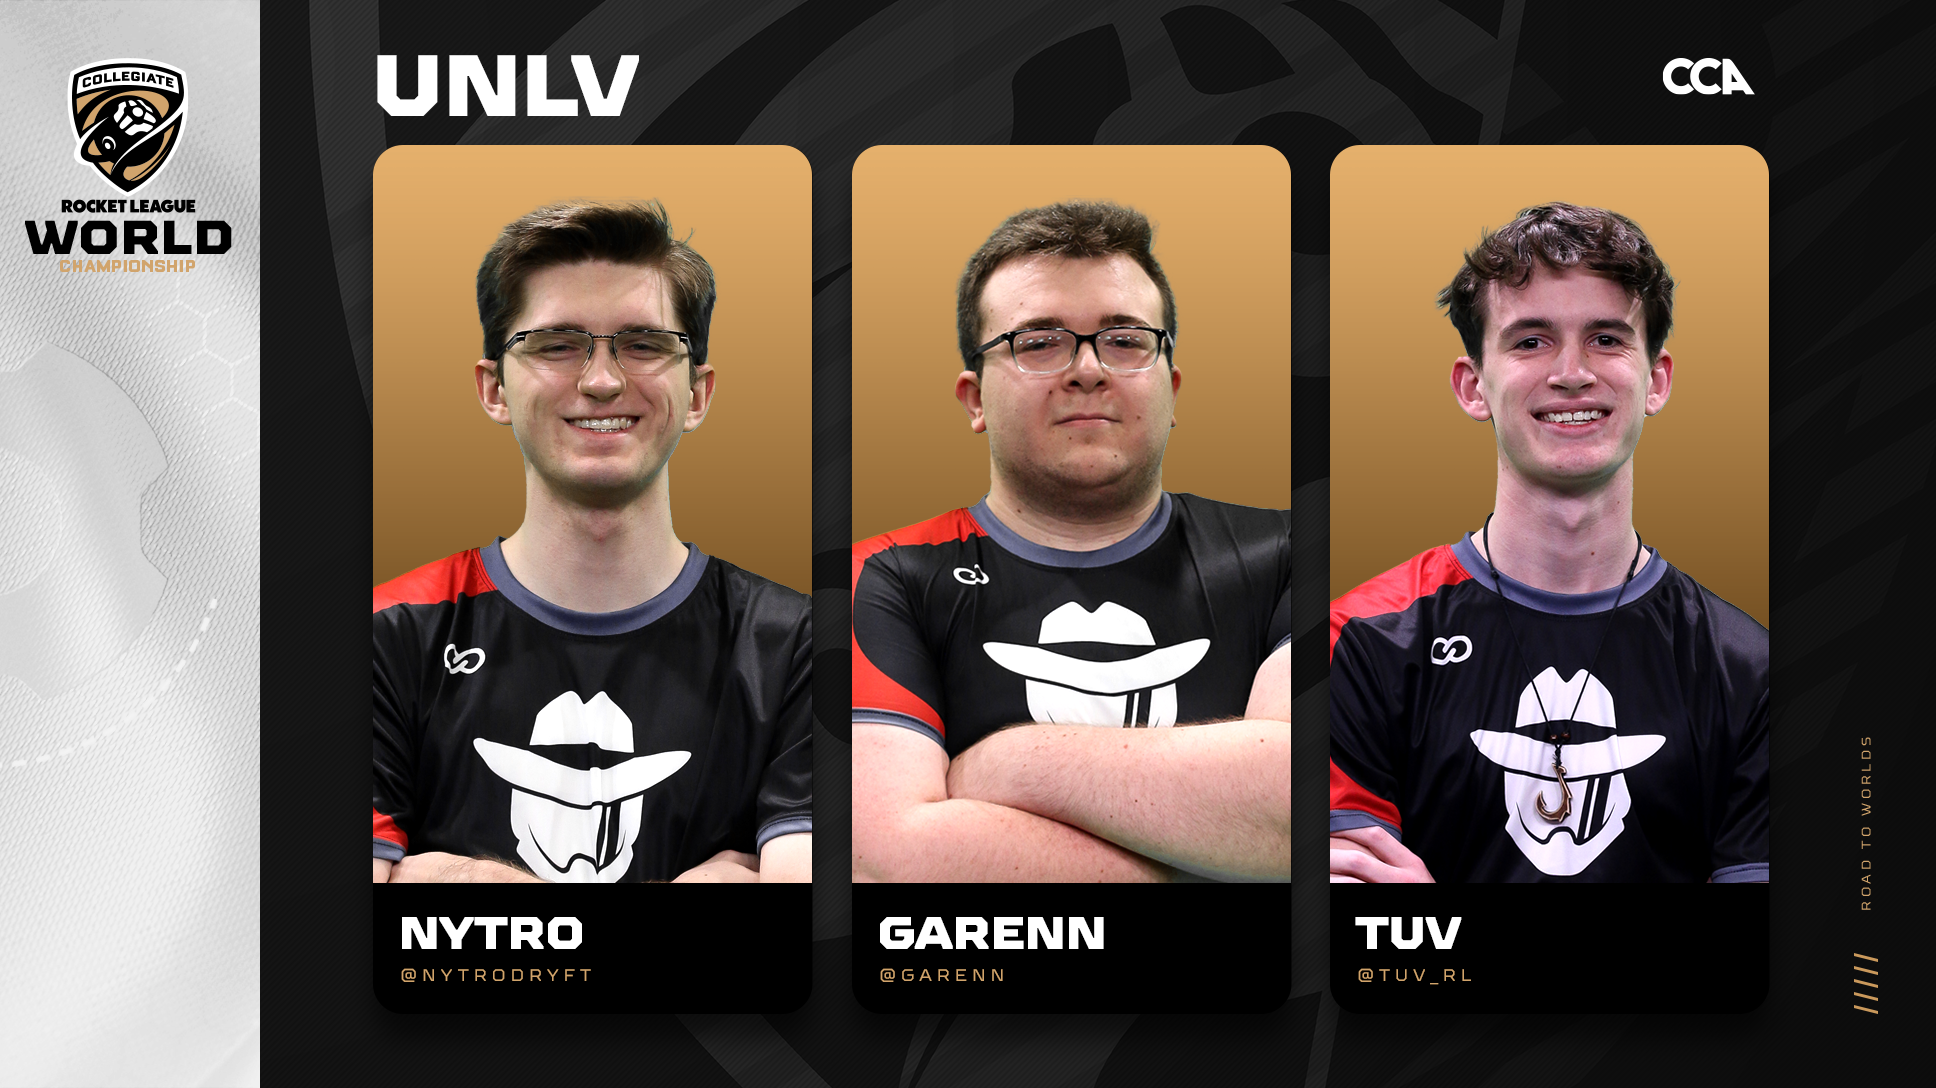 UNLV Road to Worlds header with images of Nytro, Garenn, and Tuv